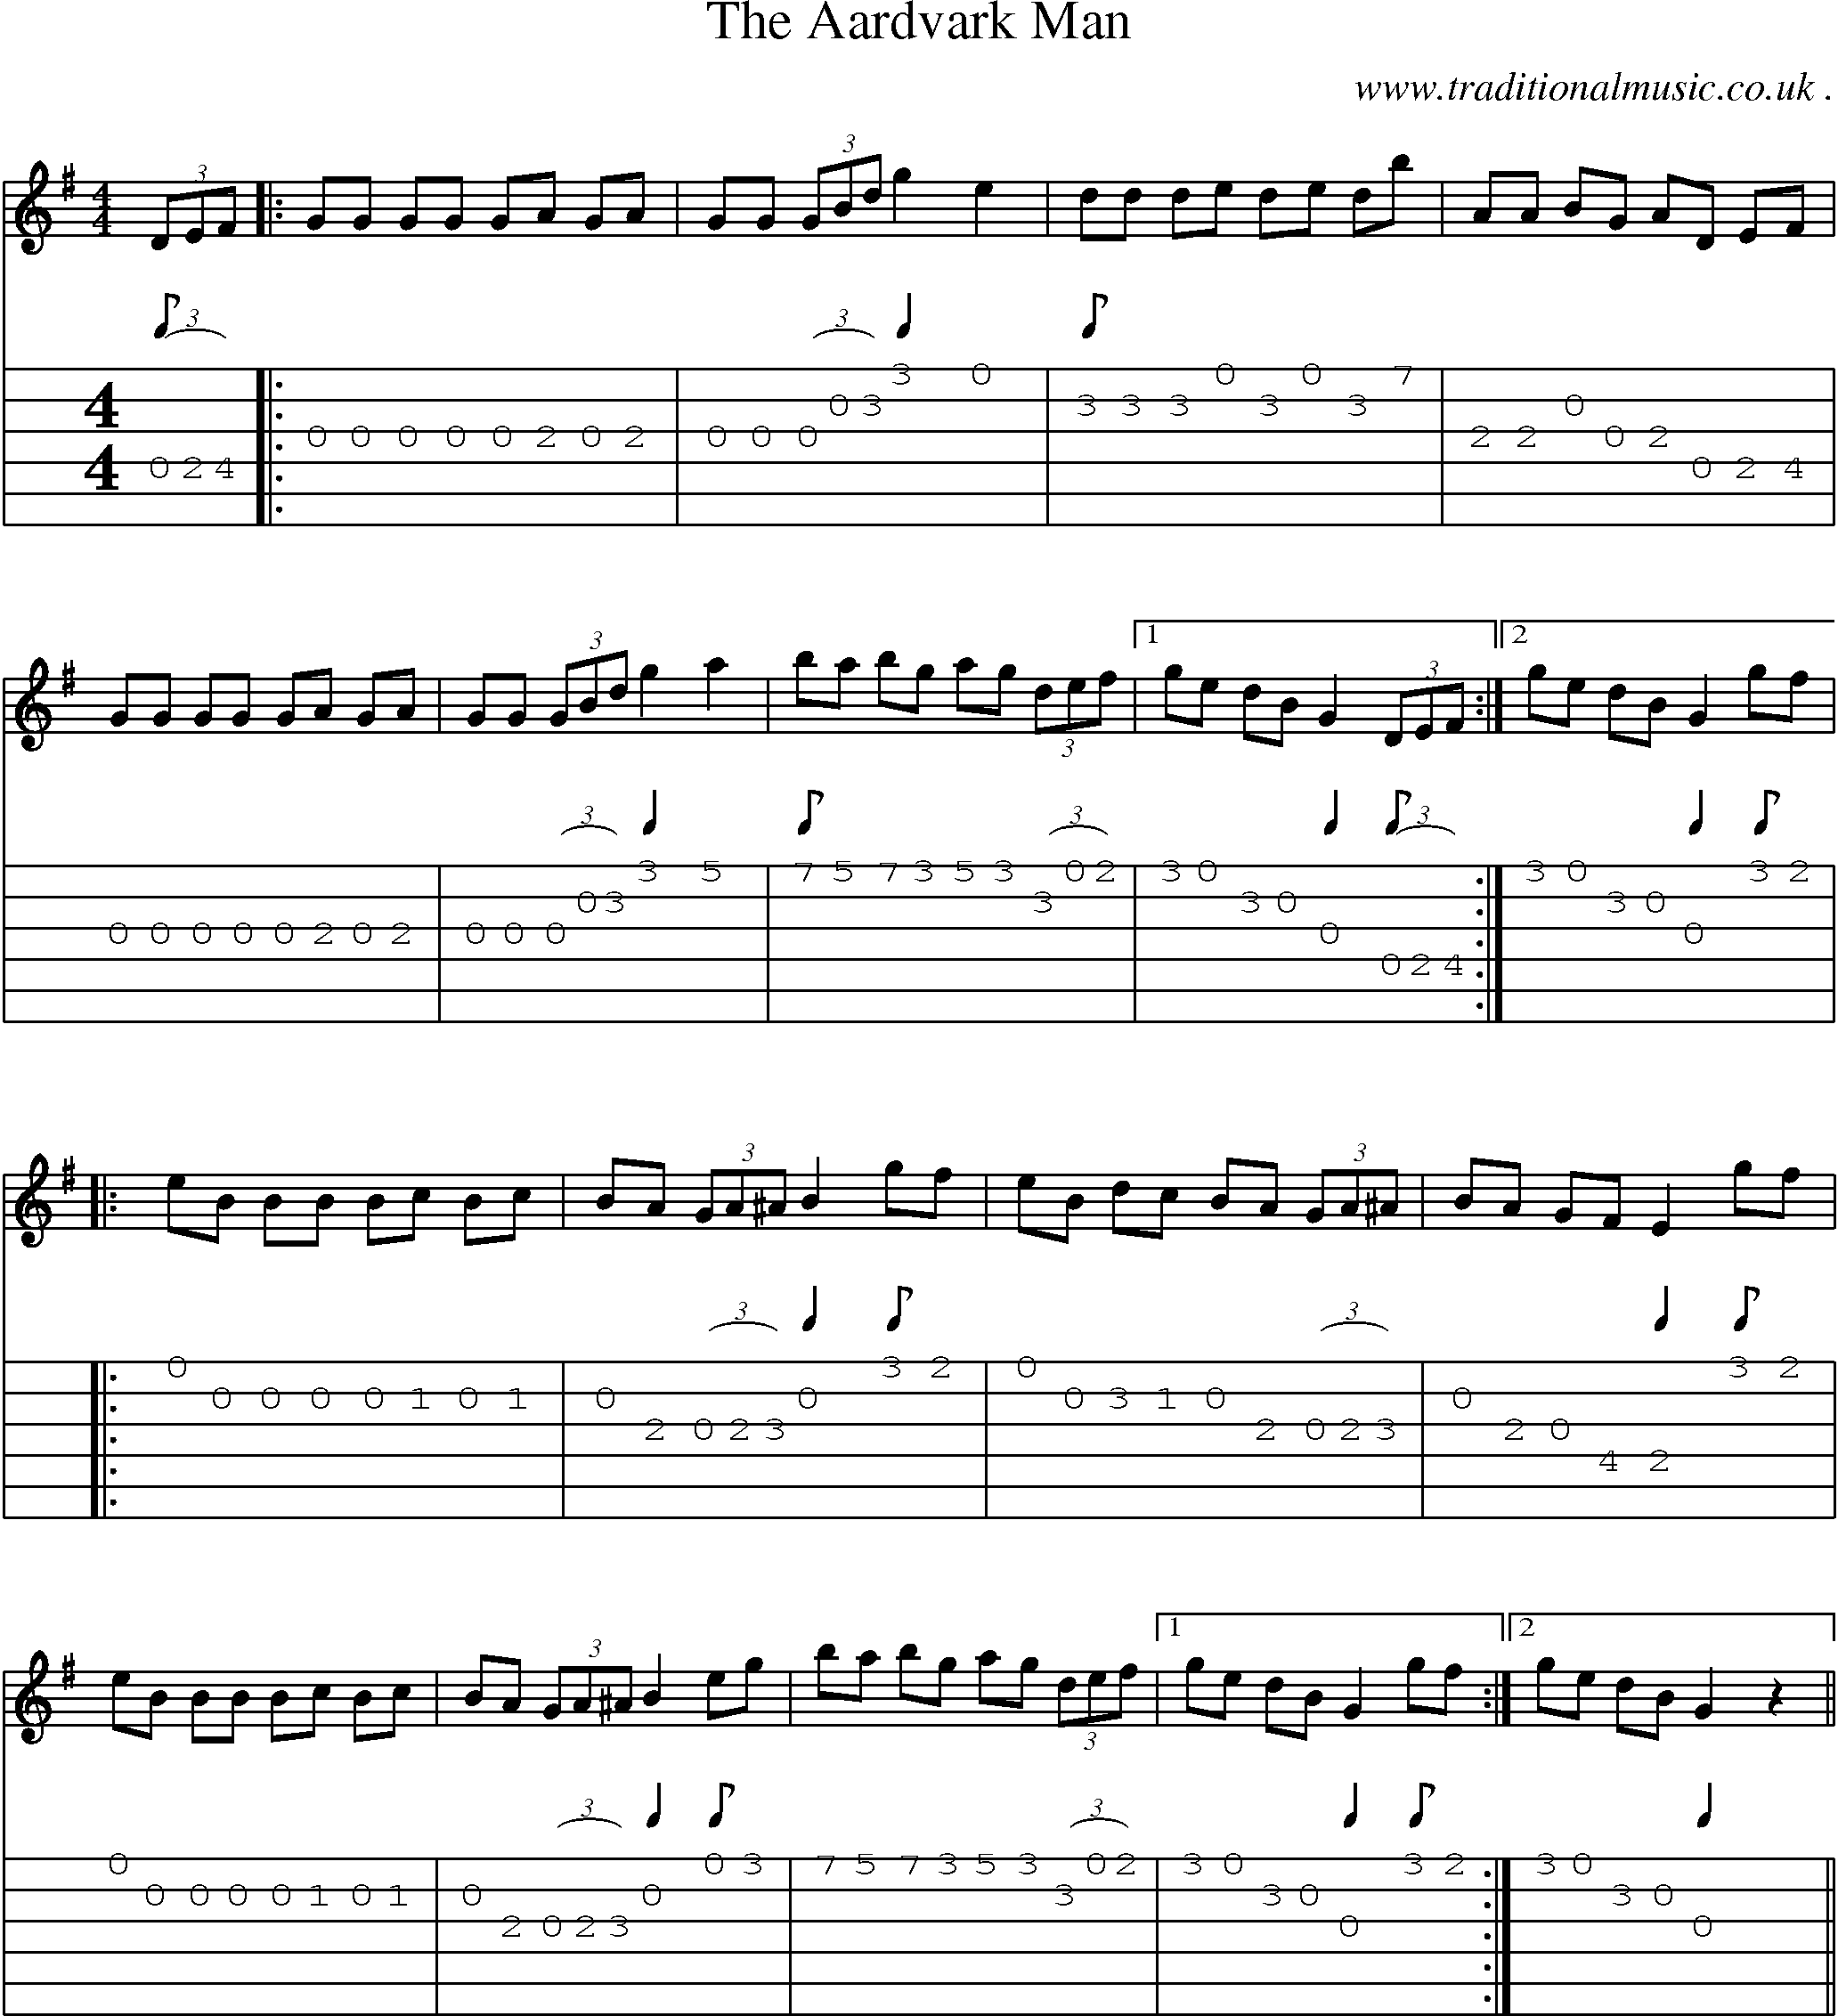 Sheet-Music and Guitar Tabs for The Aardvark Man